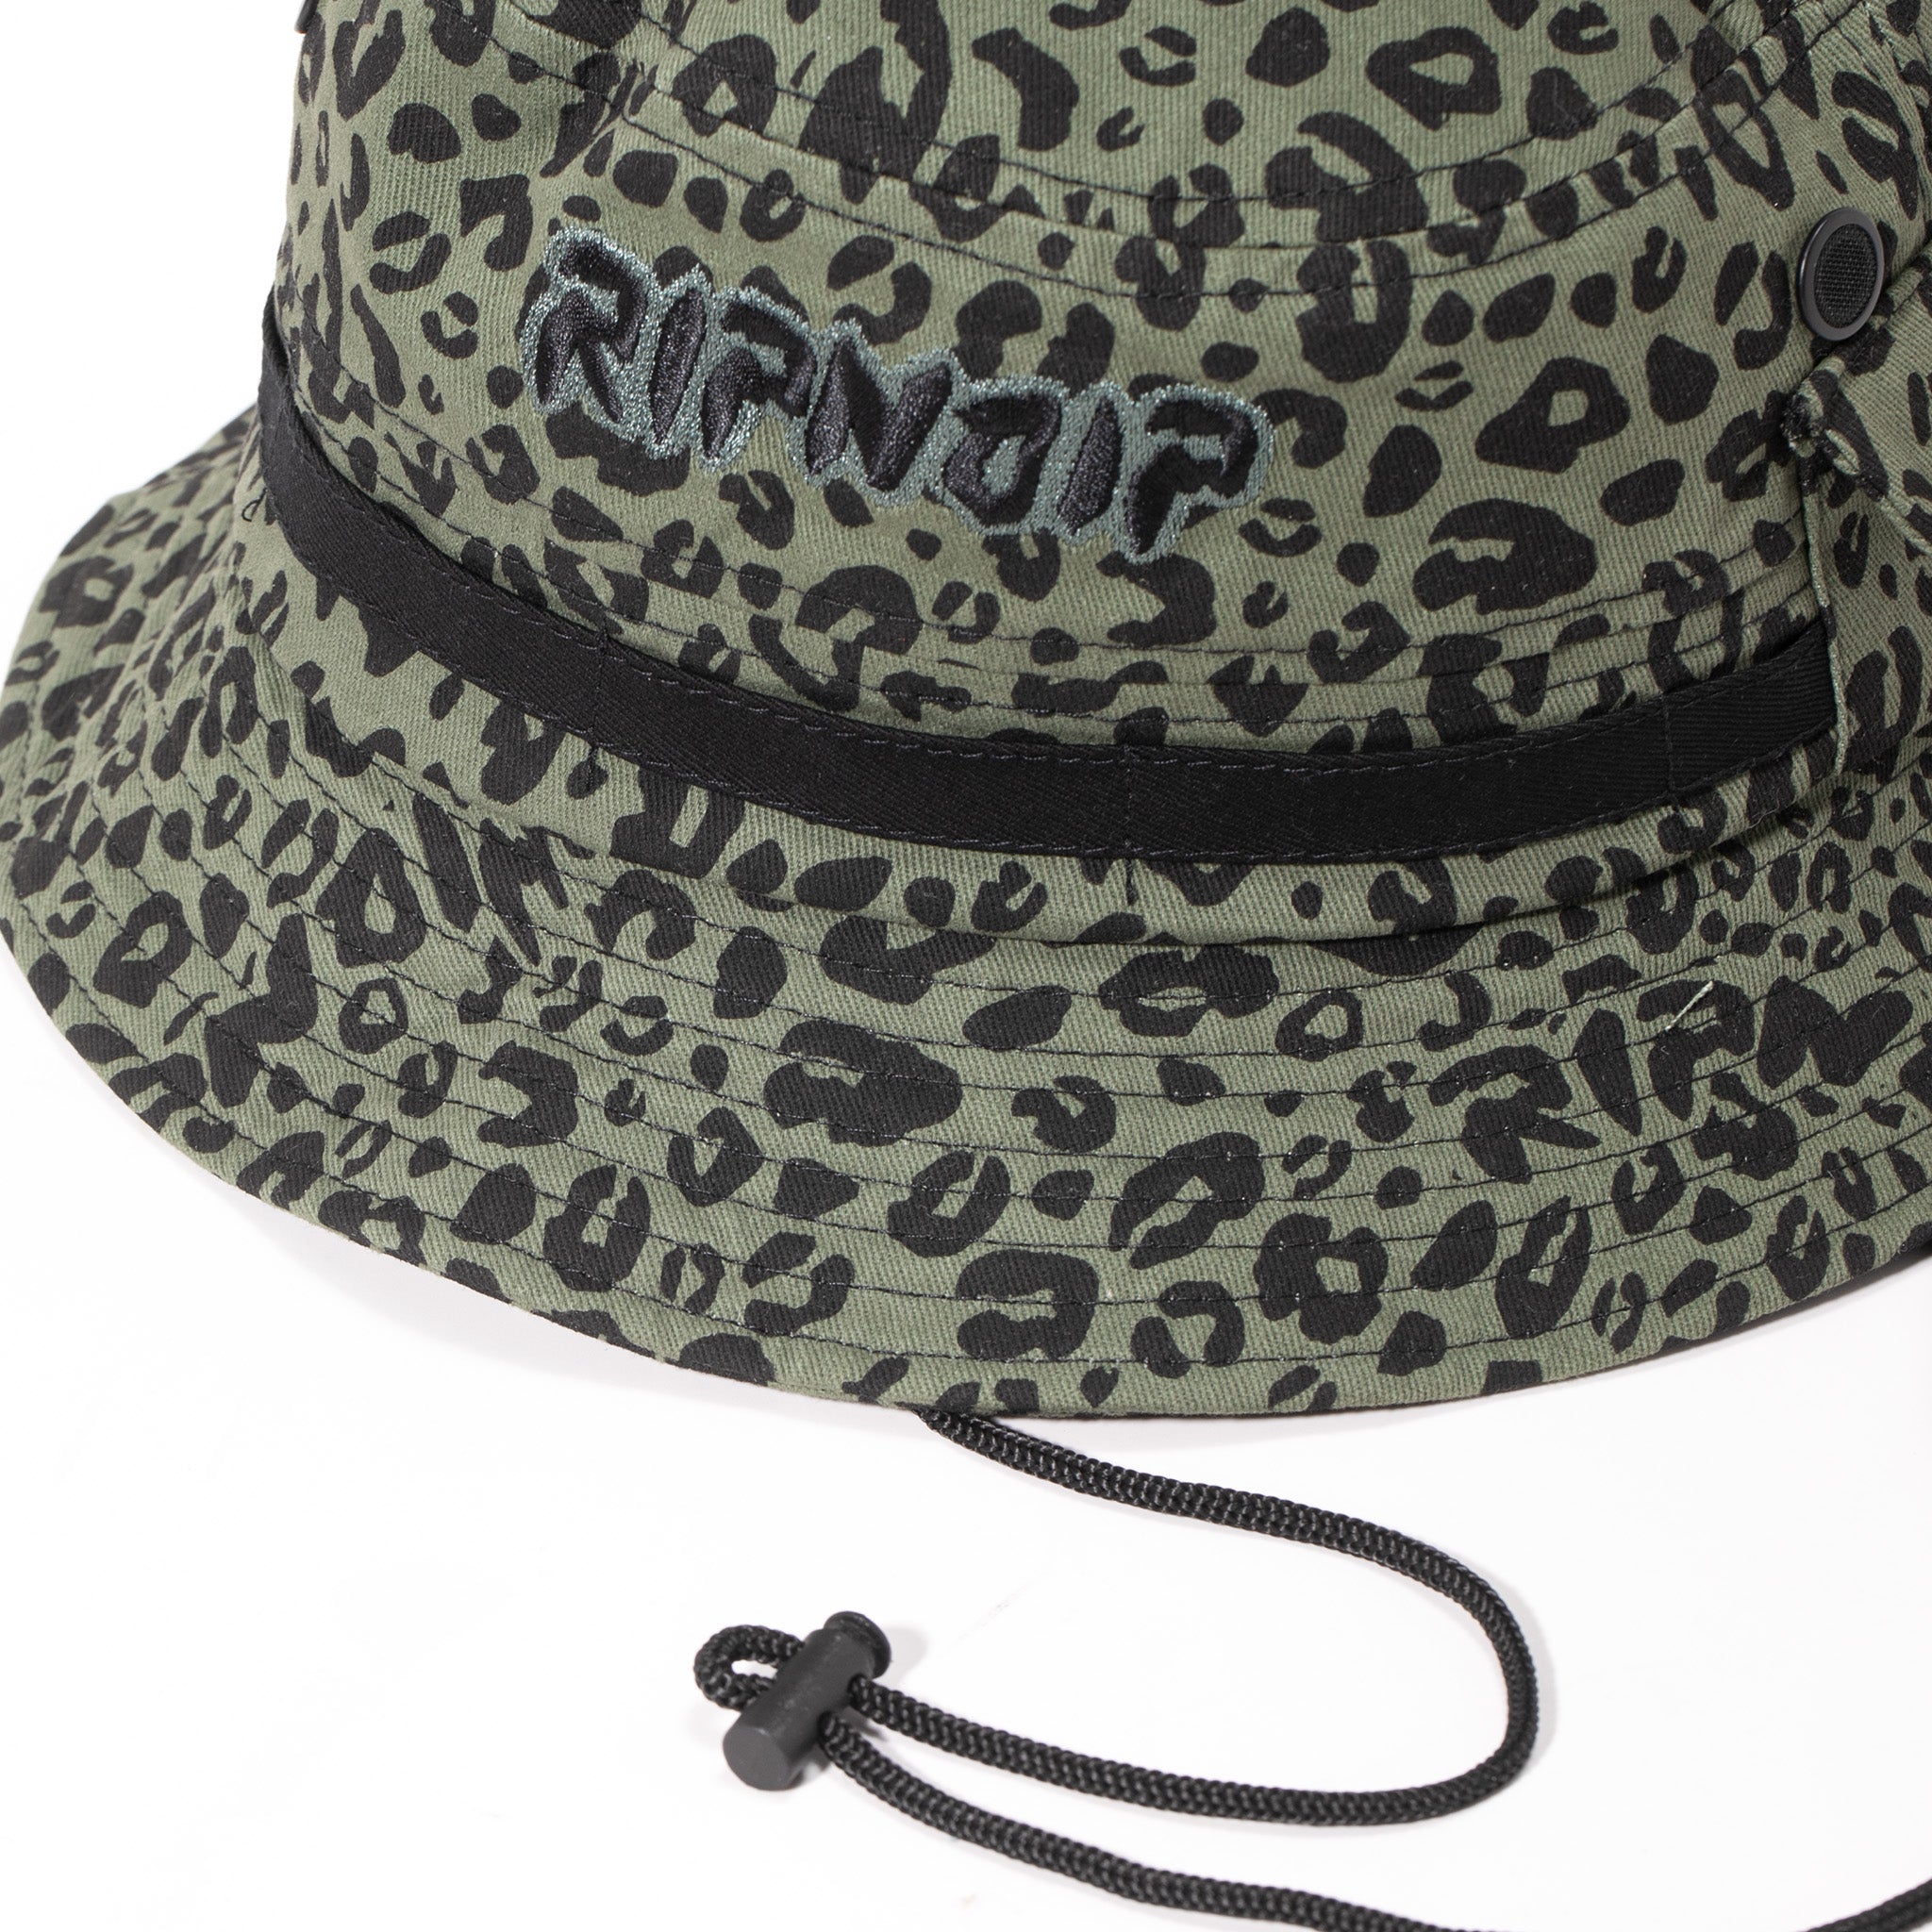 RipNDip Spotted Cotton Twill Bucket Hat (Olive)